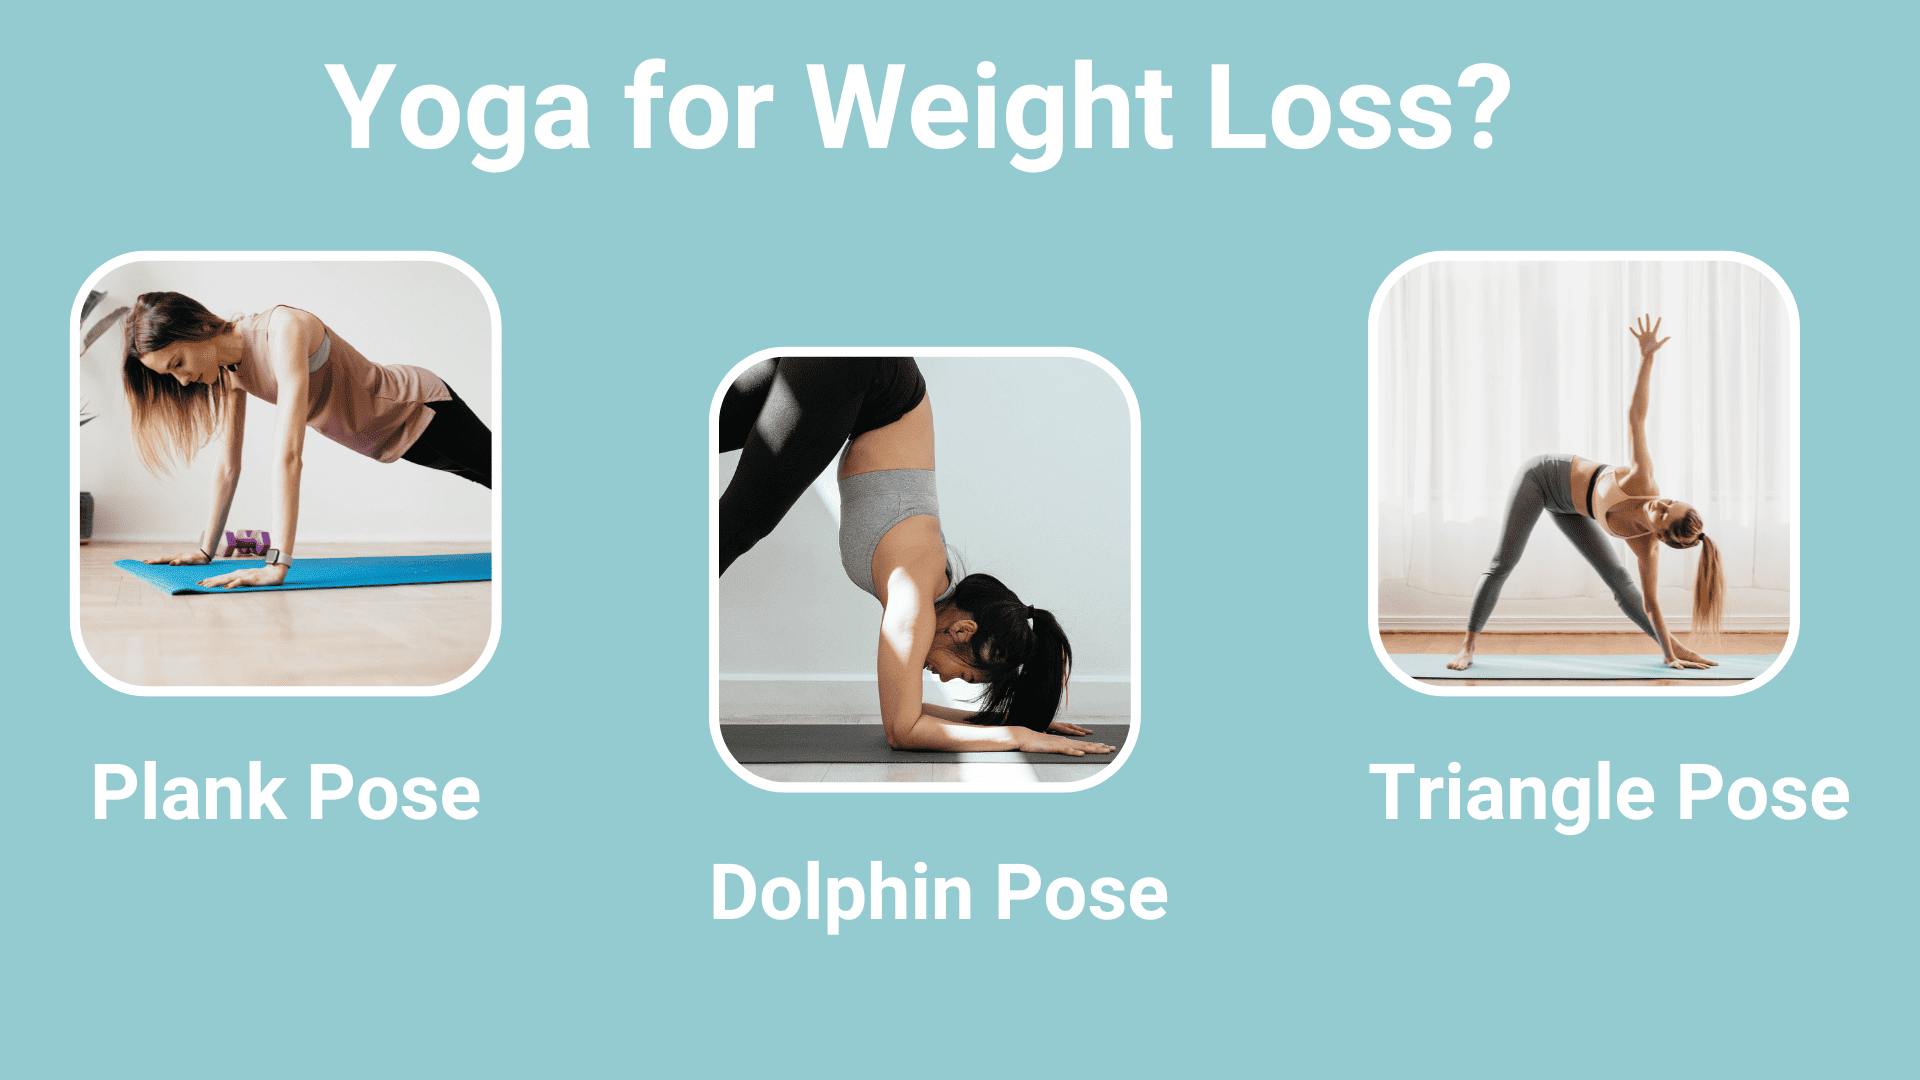 What Is Cobbler Pose And What Are Its Benefits?